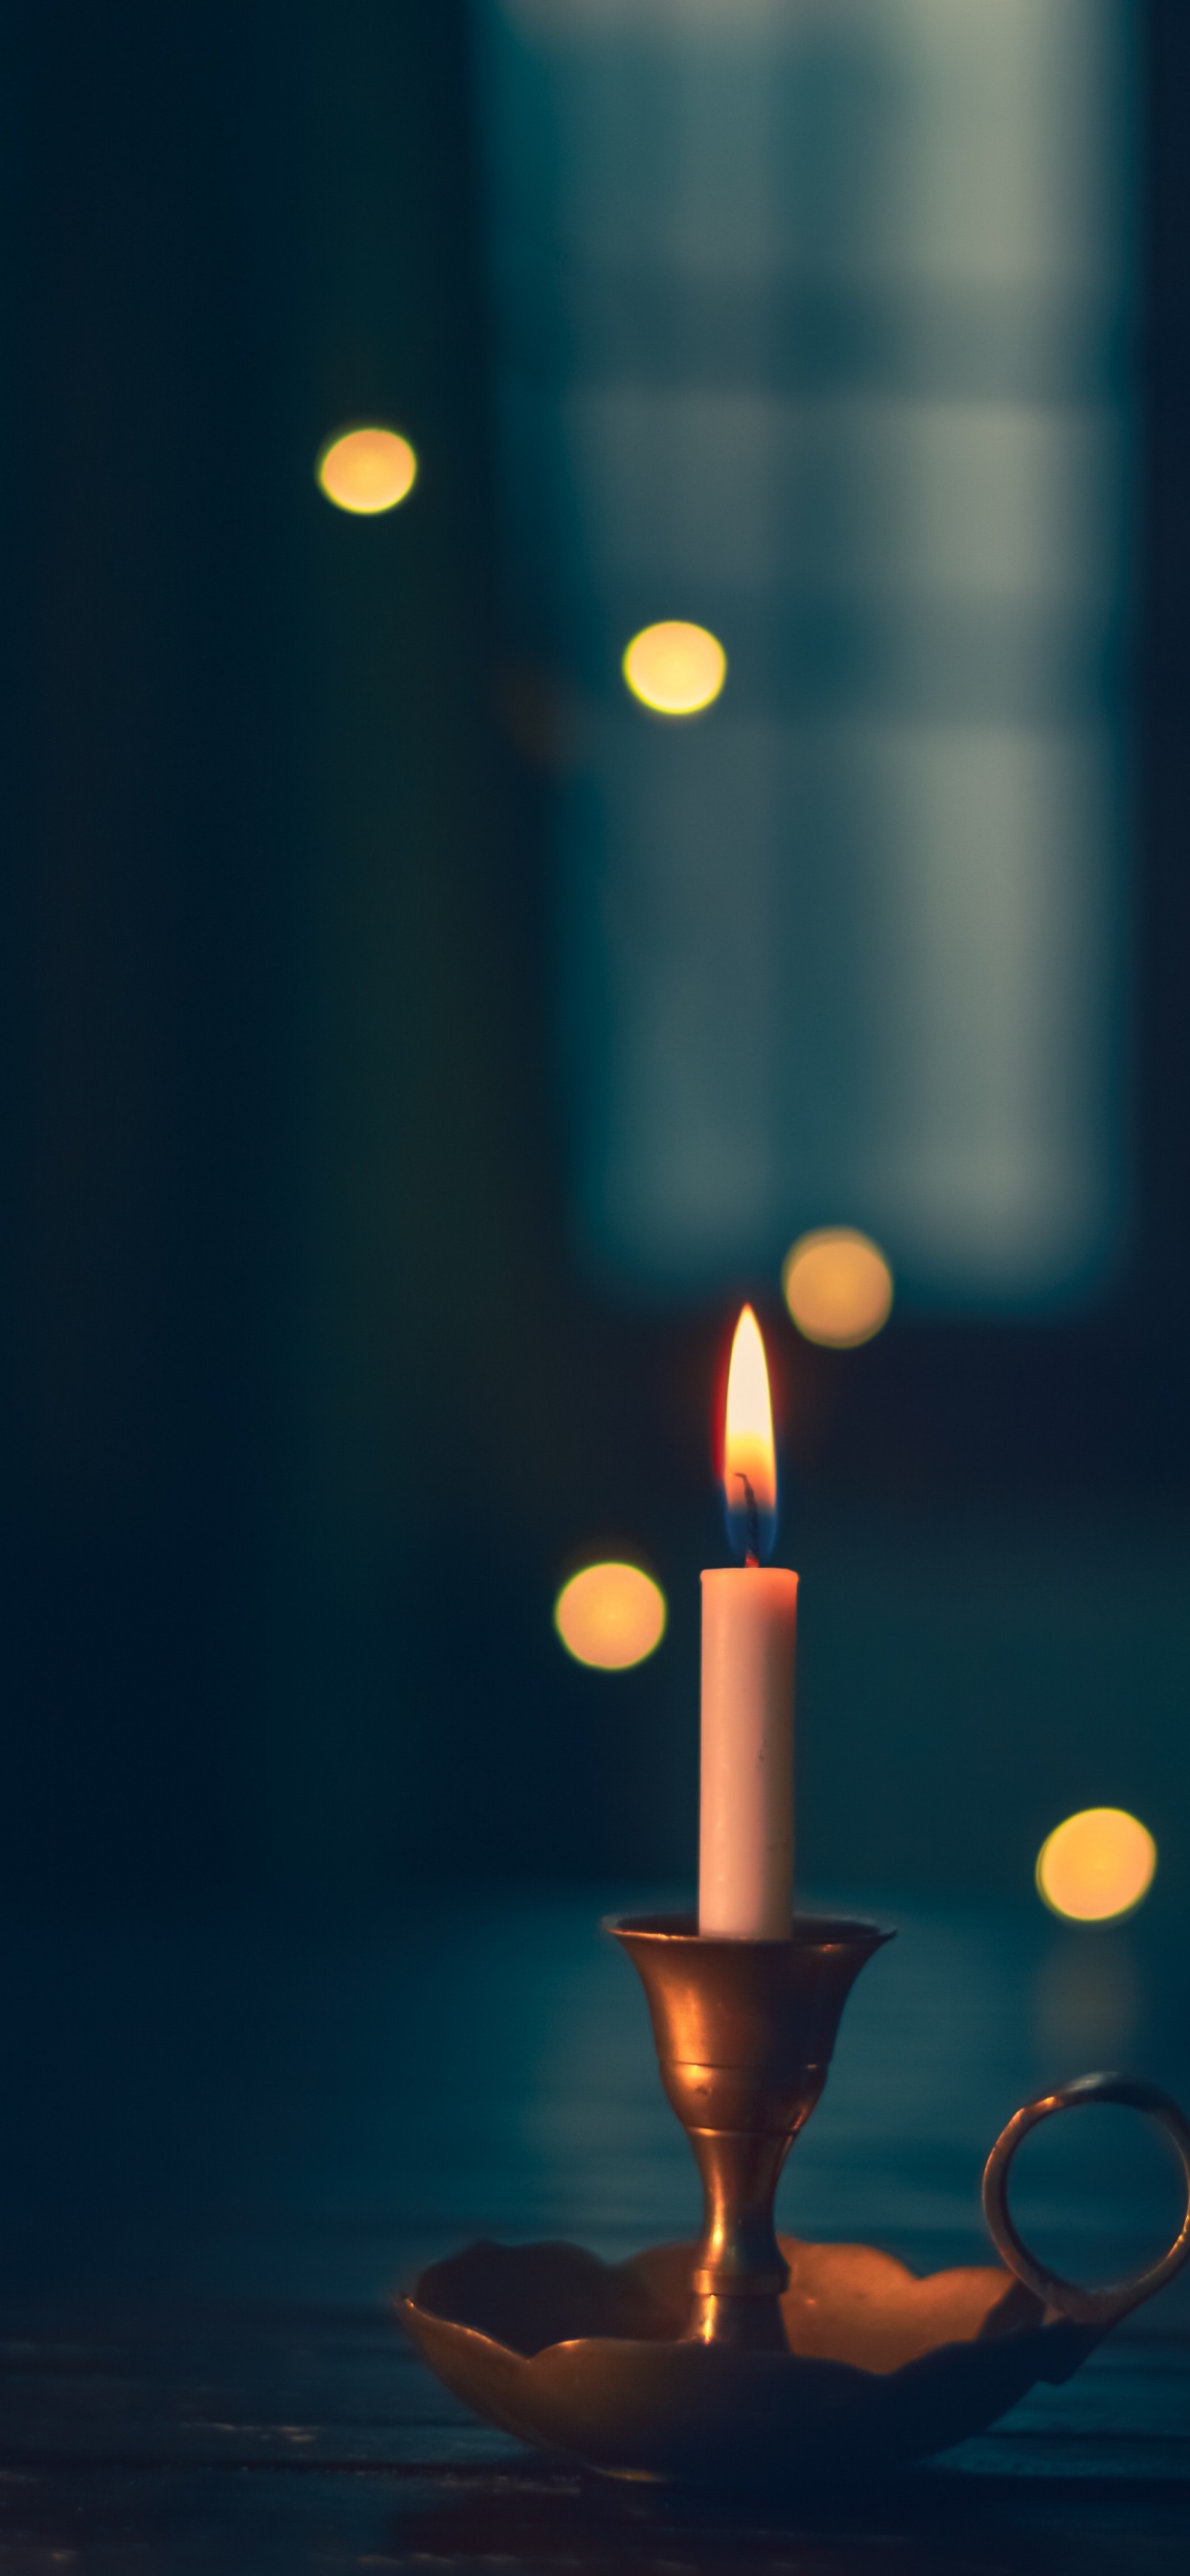 Lighted Candle in Black Holder. Wallpaper in 1242x2688 Resolution